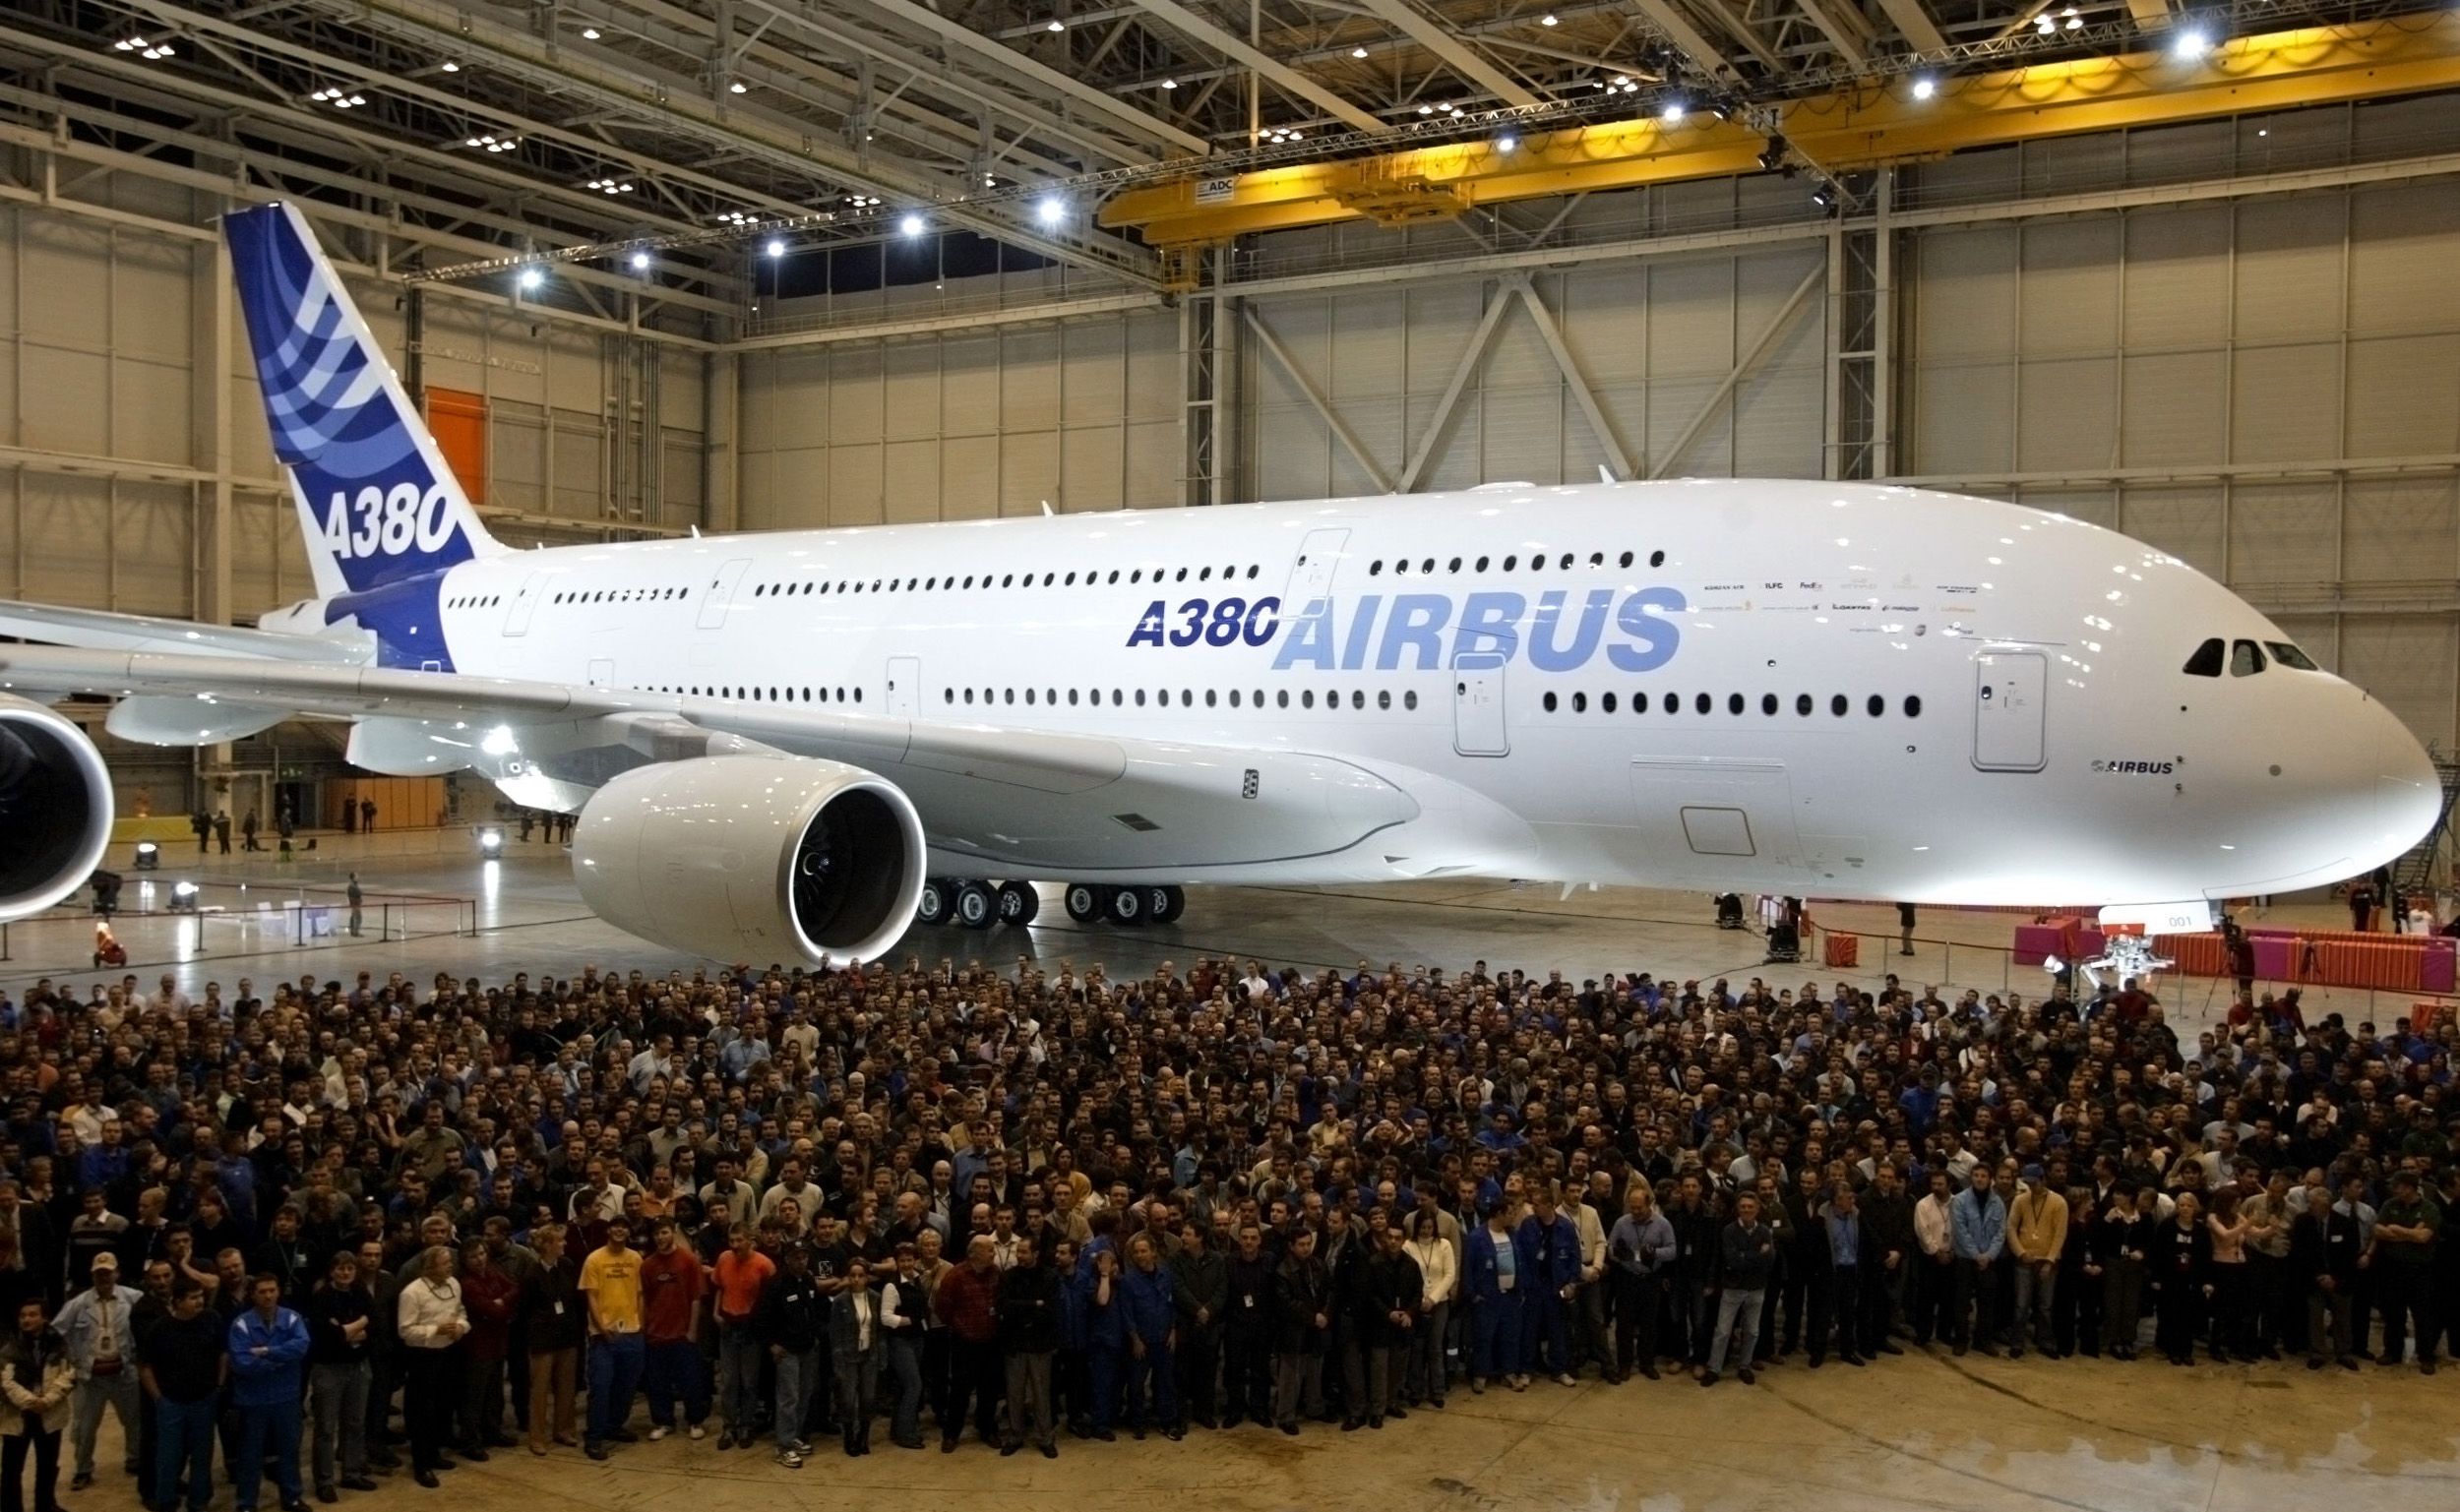 An Airbus A380 with a crowd of people in front of it